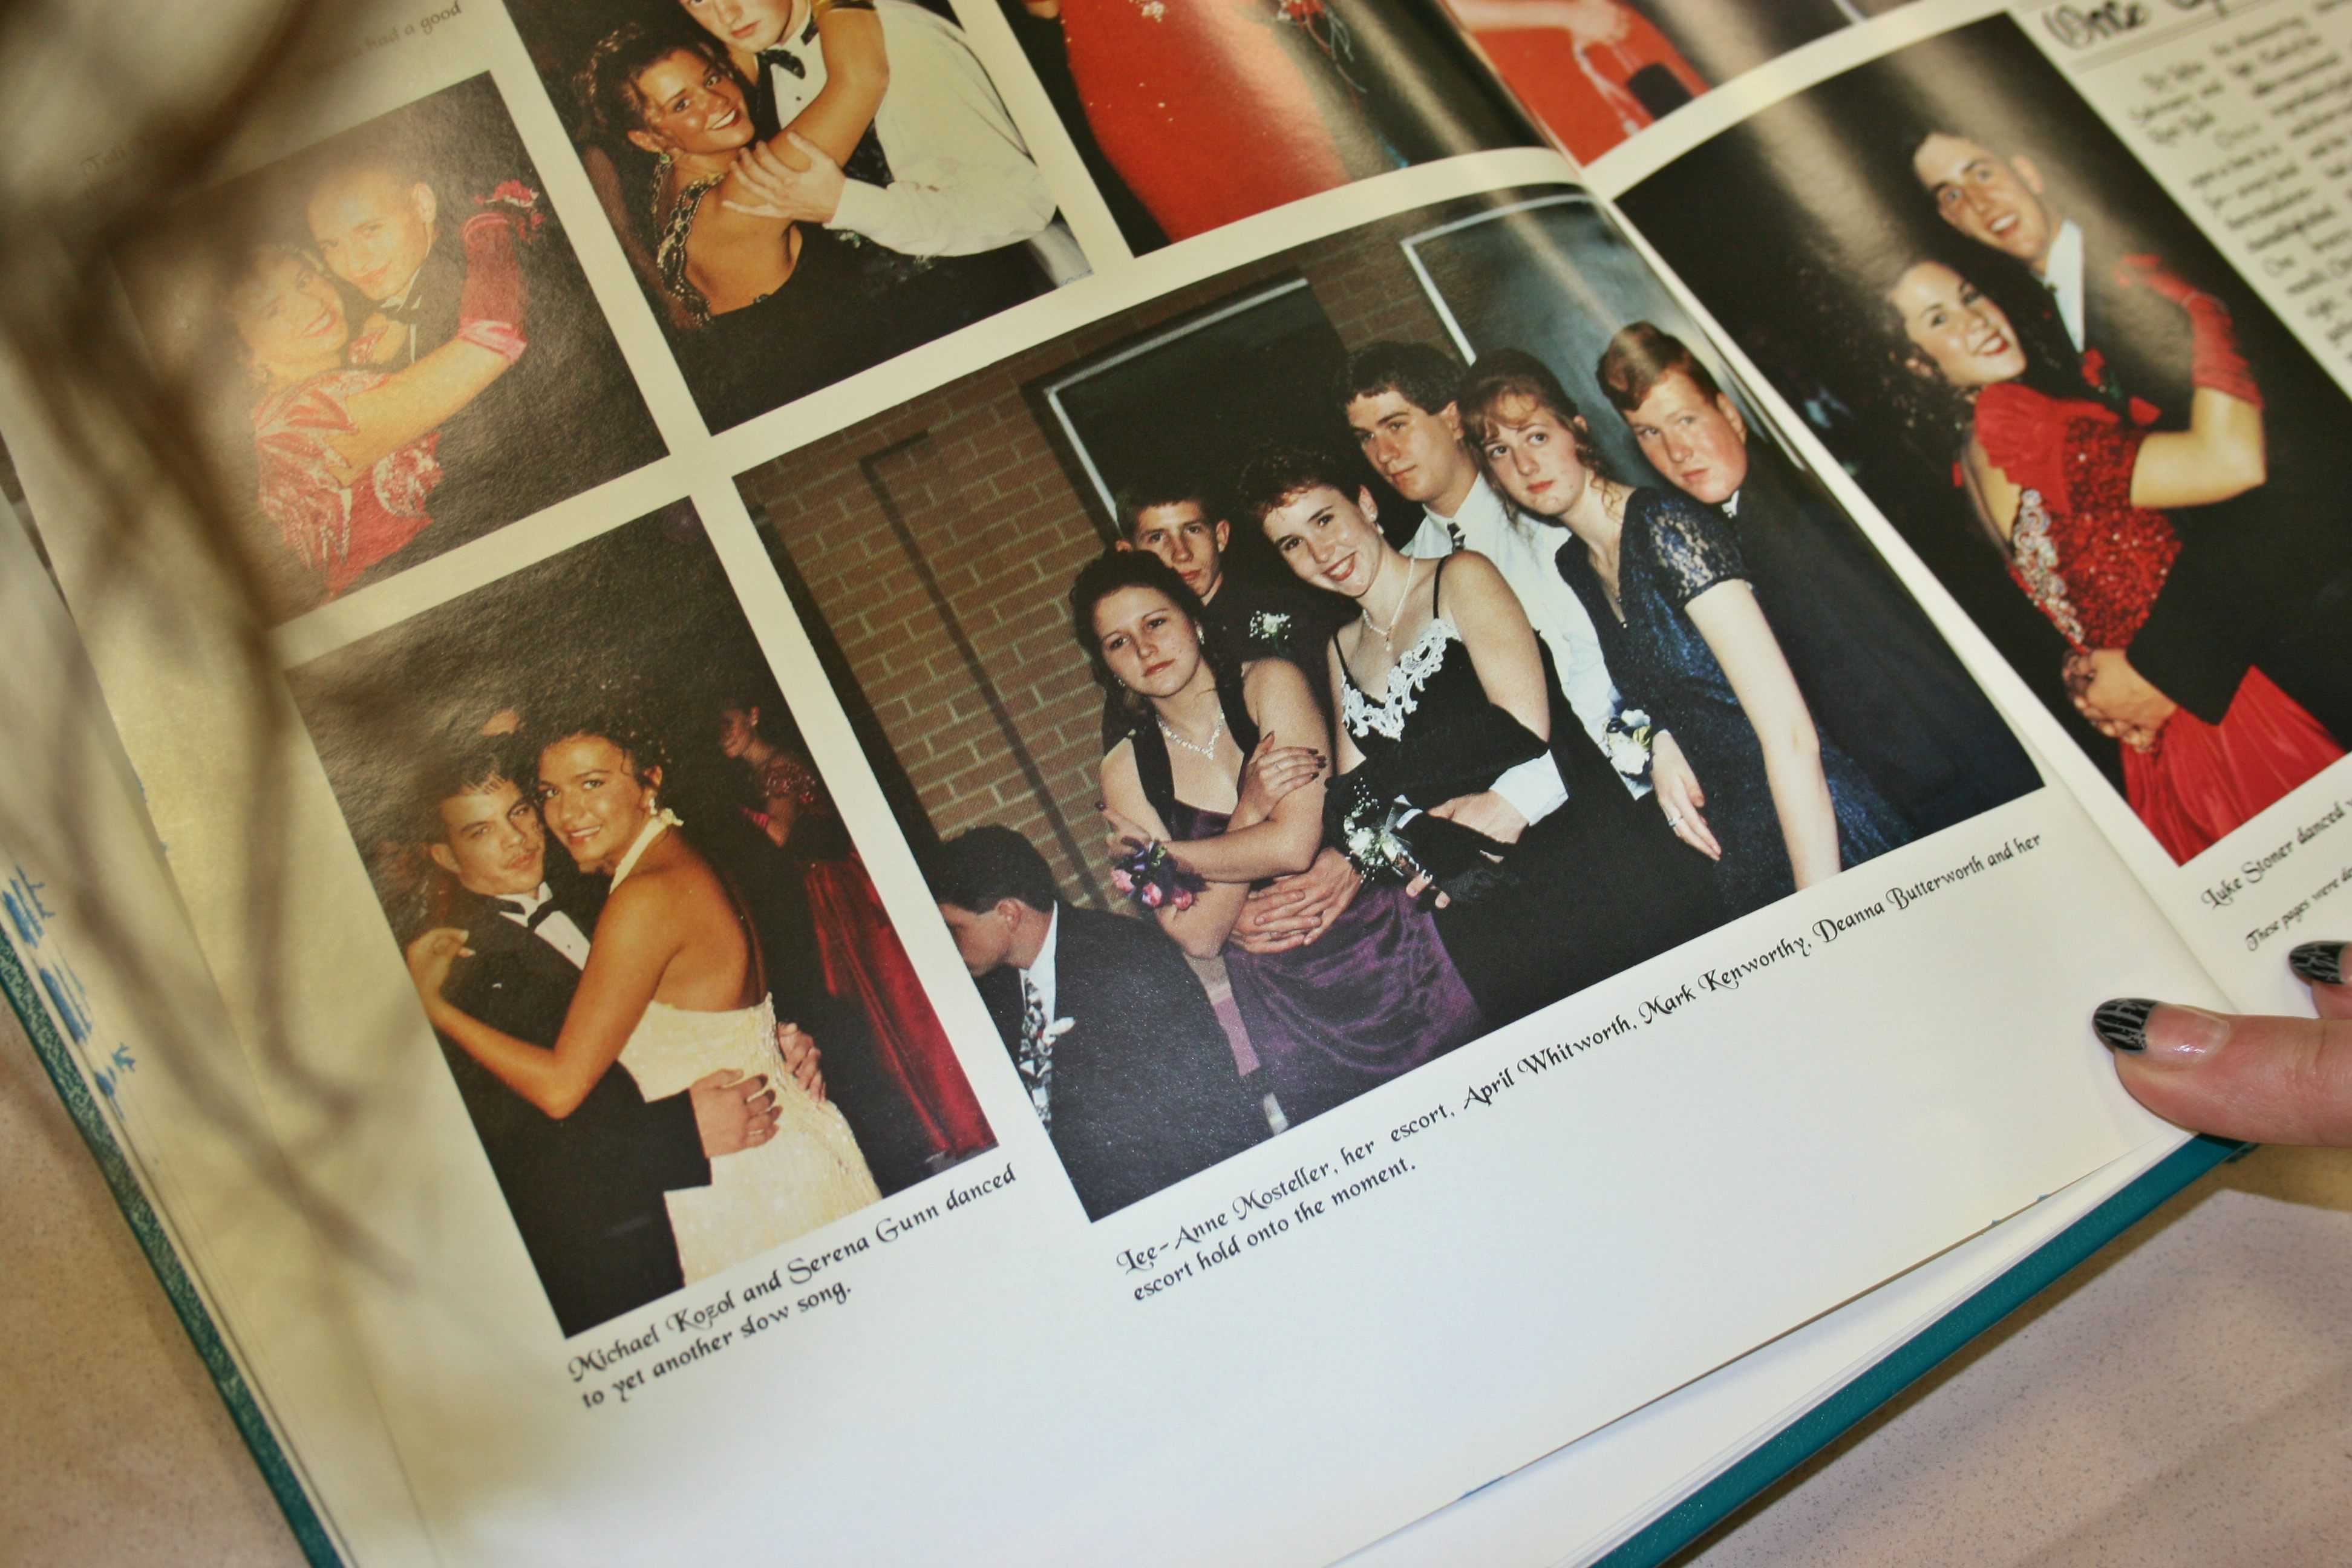 Mrs. LeeAnne Walters, a Kearsley graduate, looks at a prom photo of her friends and her in the 1996 yearbook, Echo.